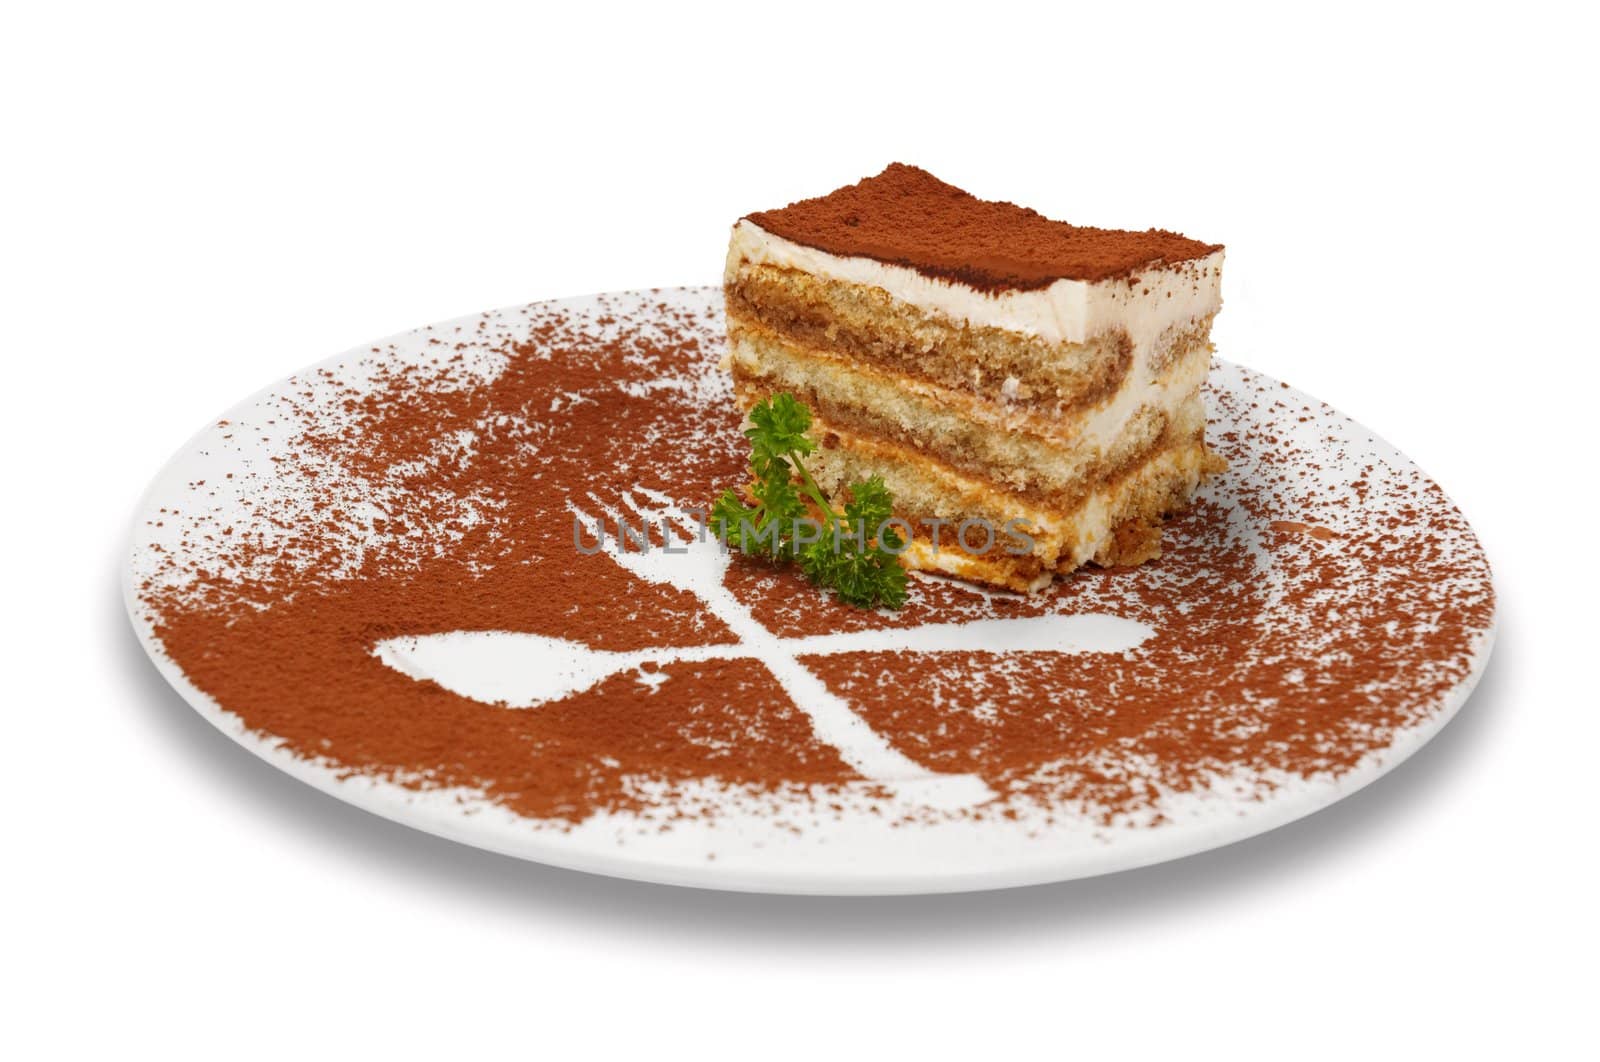 tiramisu dessert served on plate with cpecial decoration. isolated.